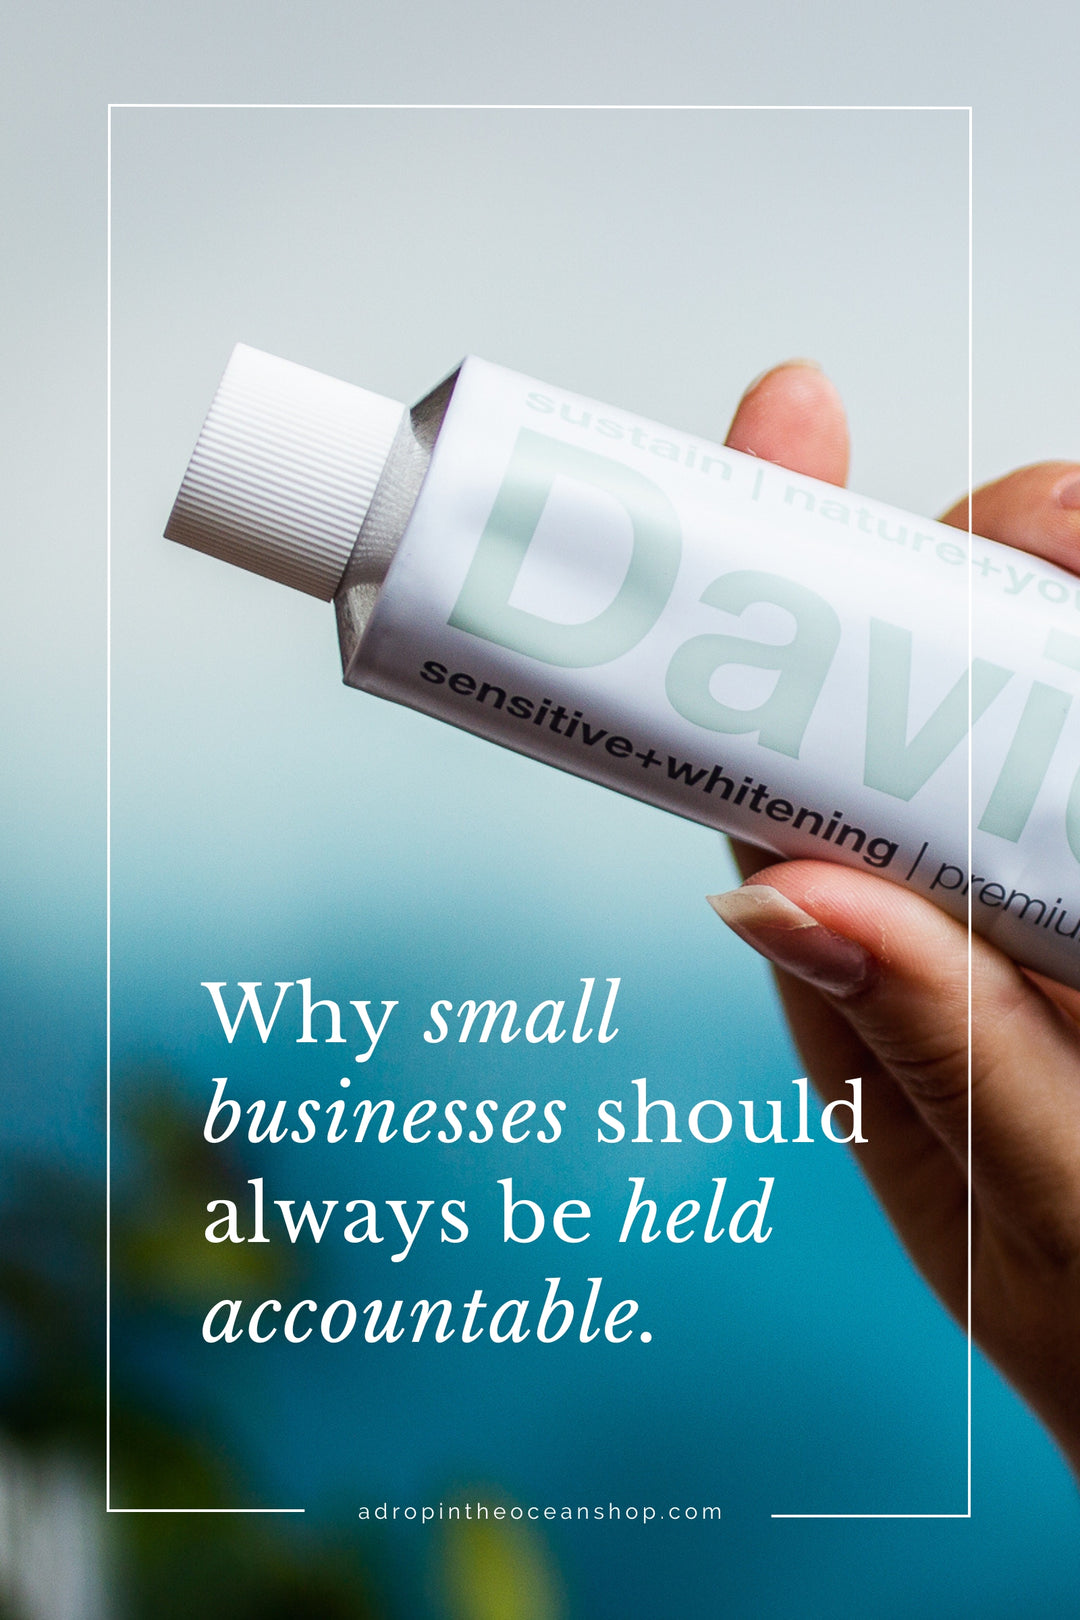 A Drop in the Ocean Blog: Why Small Businesses Should Always be Held Accountable